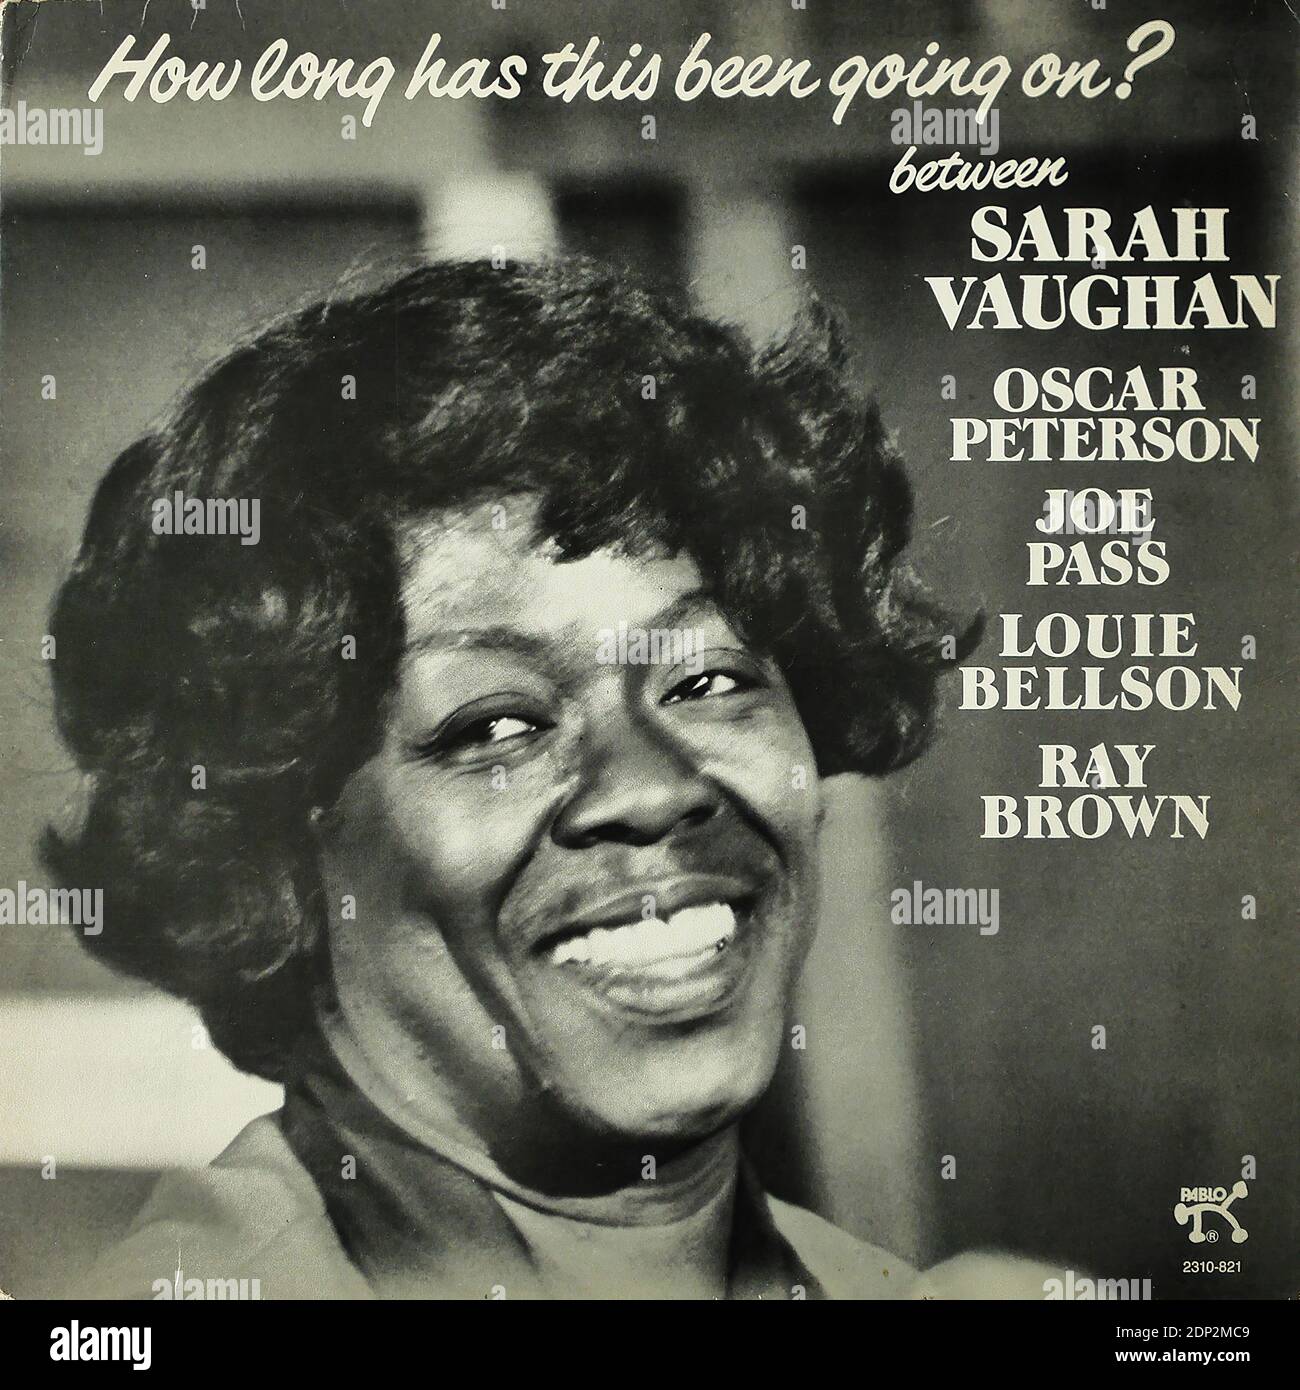 Sarah Vaughan, Oscar Peterson, Joe Pass, Louie Bellson, Ray Brown - How Long Has This Been Going On , Pablo 2310 821, 1978  - Vintage vinyl album cover Stock Photo